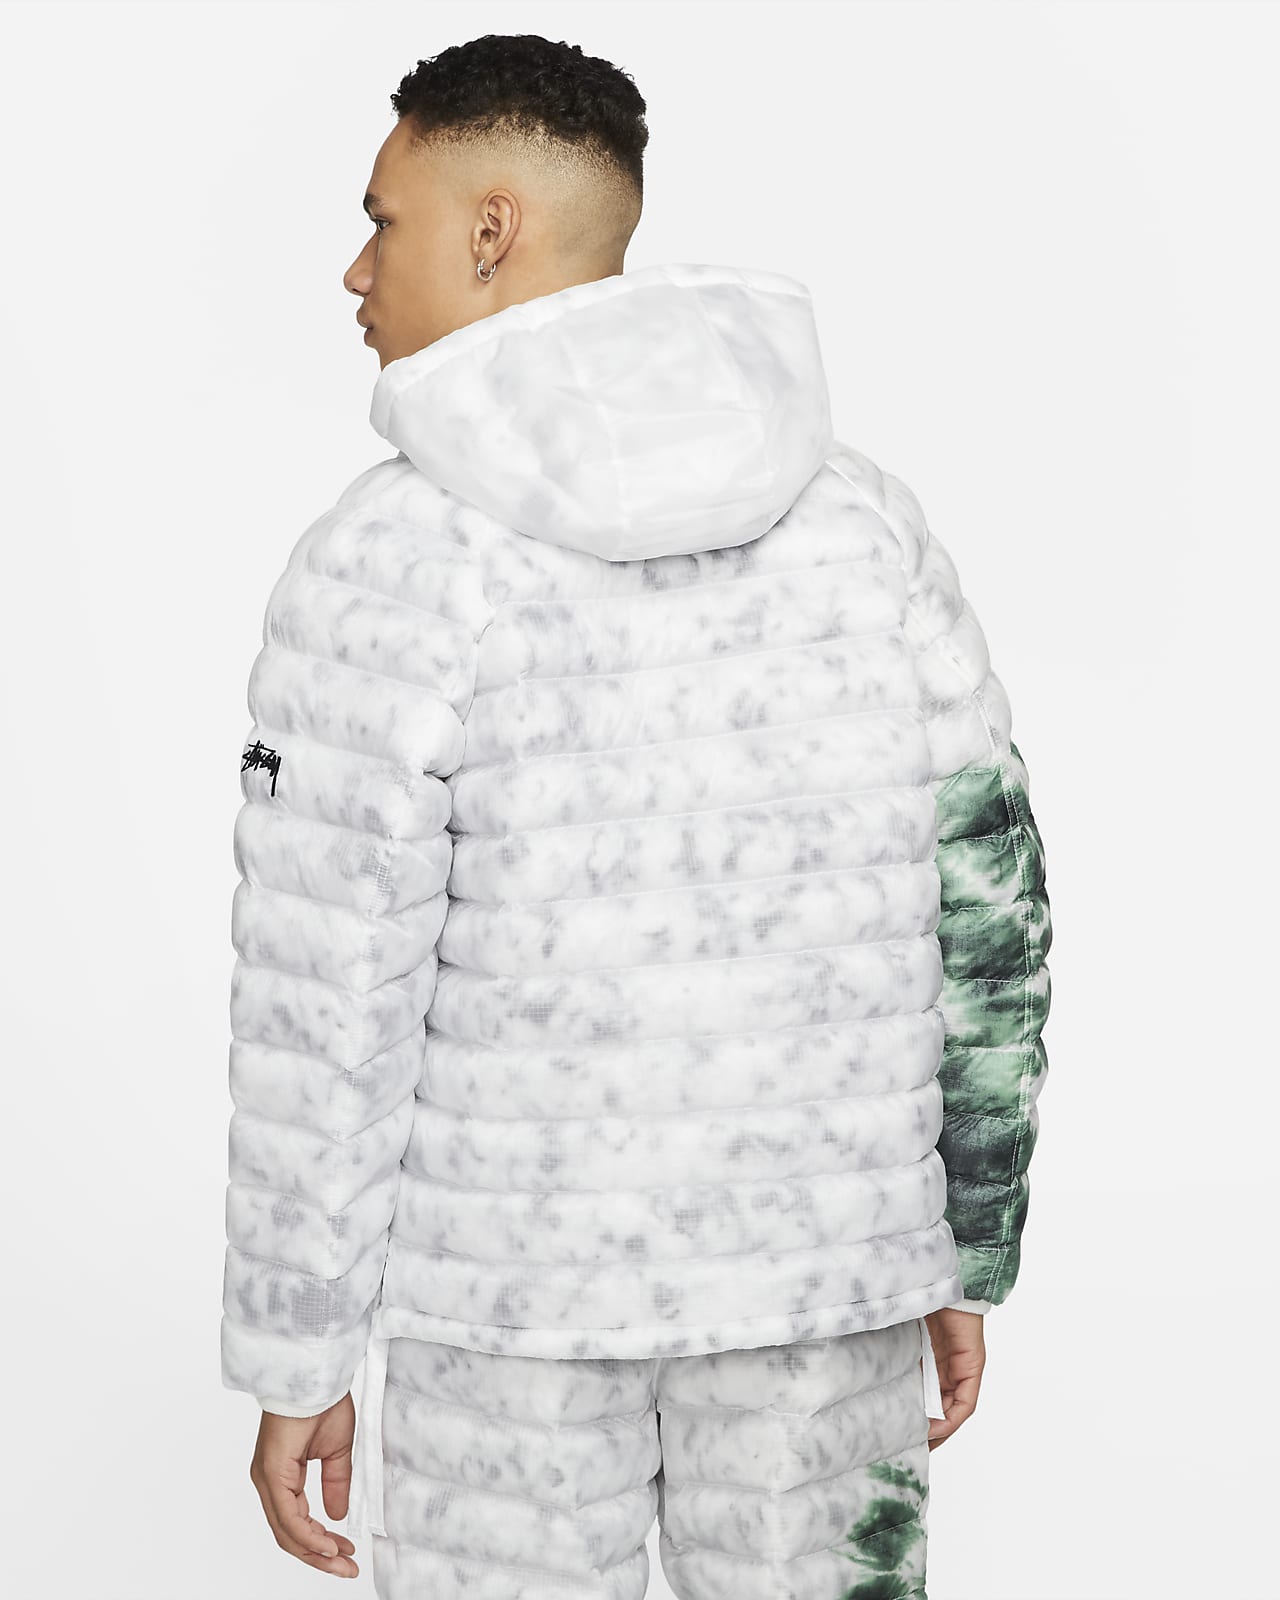 Insulated Pullover Jacket. Nike JP